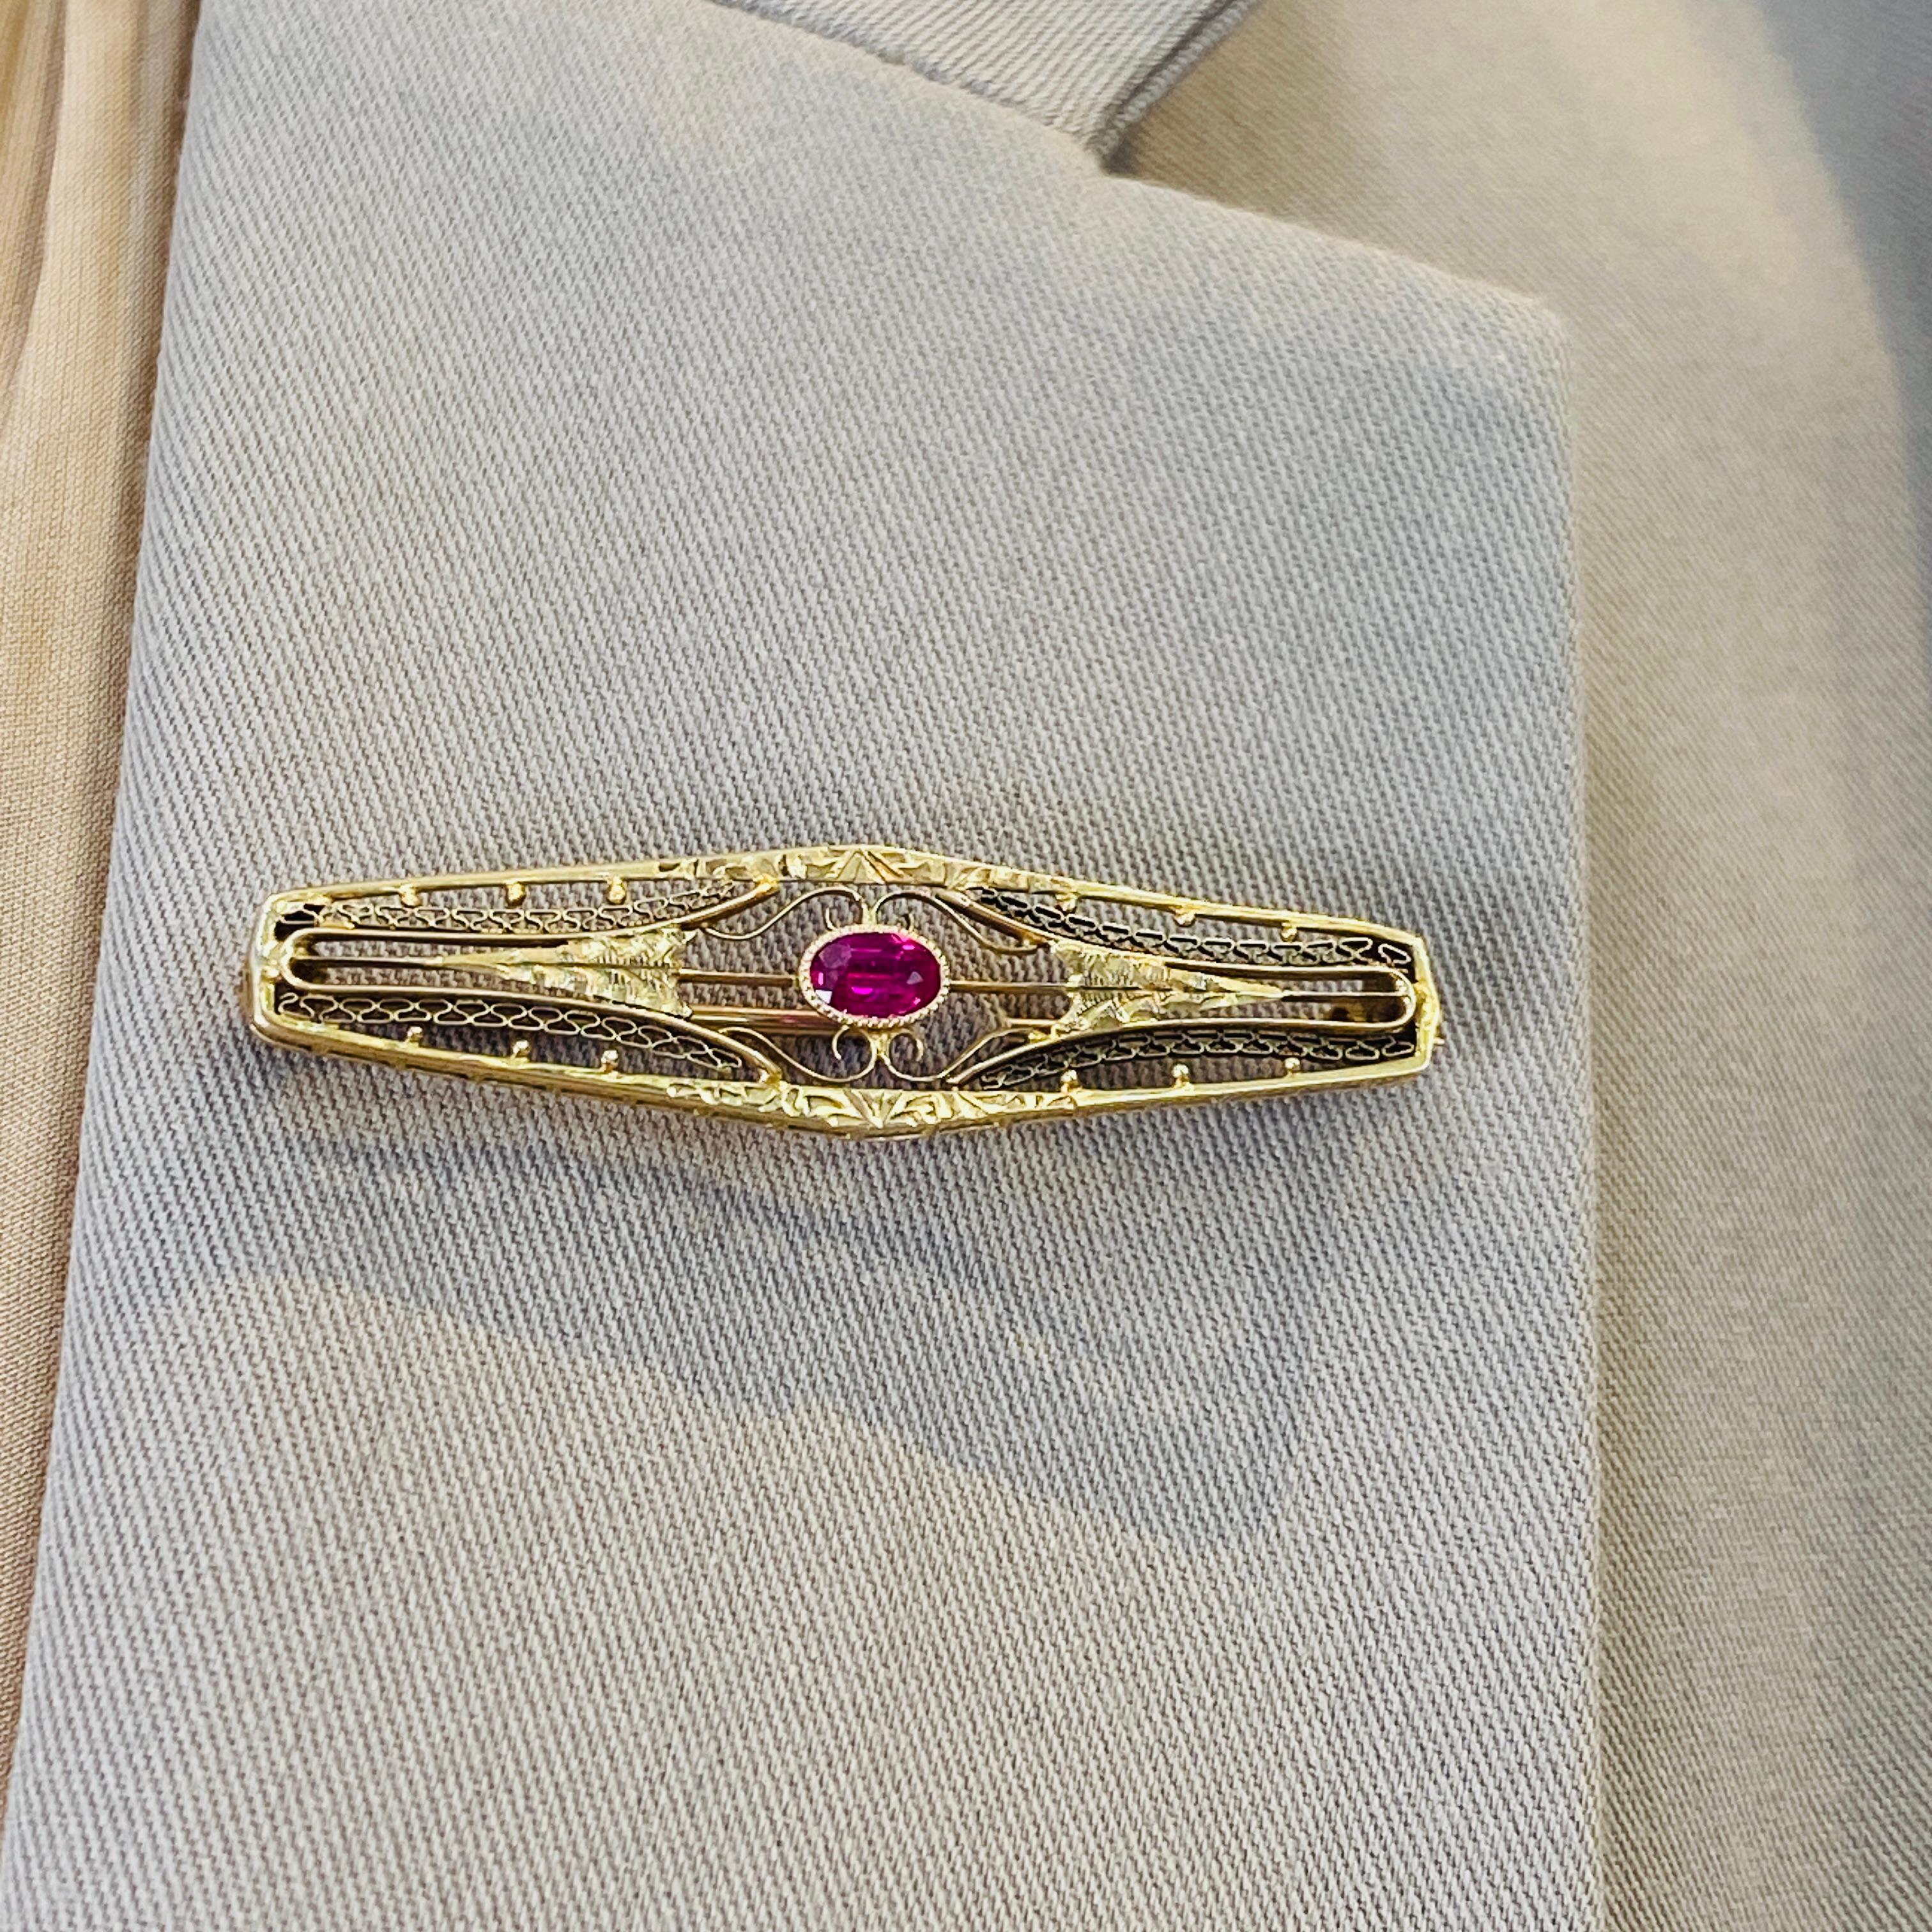 Perfect for the vintage jewelry lover, this gorgeous ruby brooch is beautifully made in 14 karat yellow gold! Fine wirework netting and diamond-cut details make this a beautifully intricate piece that reveals more details from every new angle you